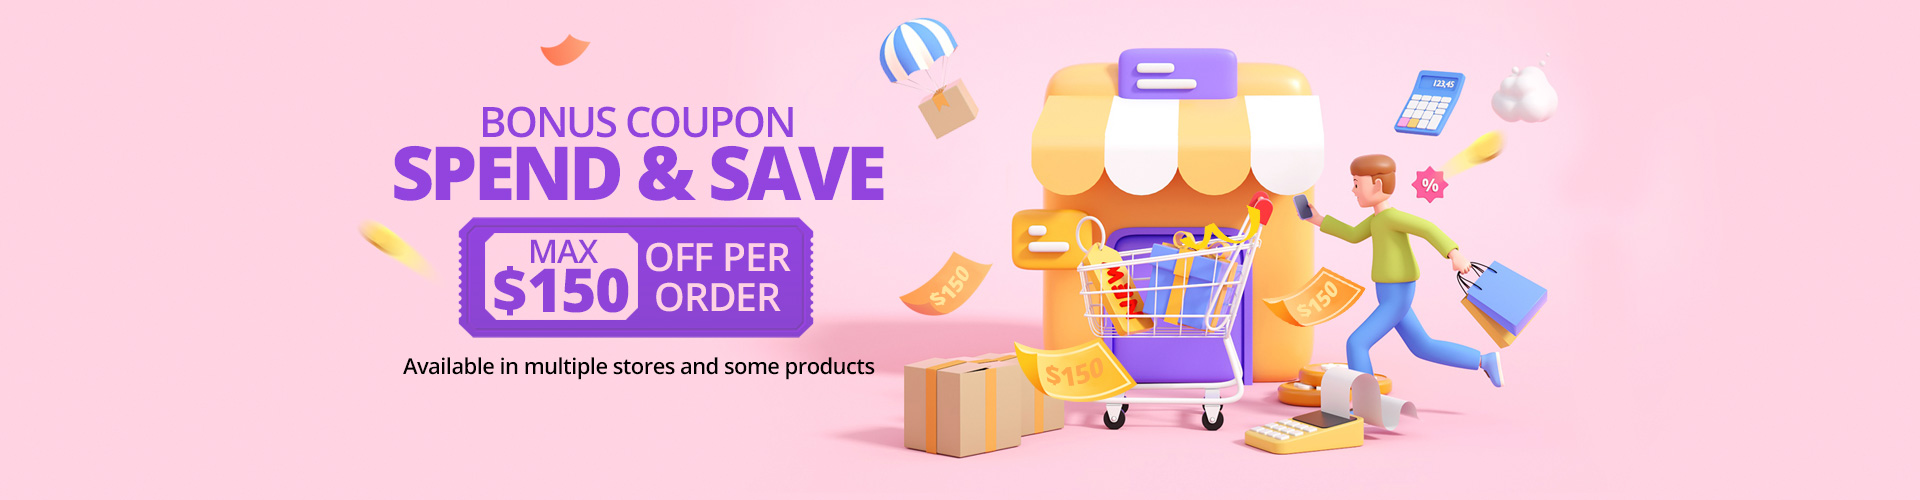 Cross-Store Coupons, Deep Discount Coupons, Save More